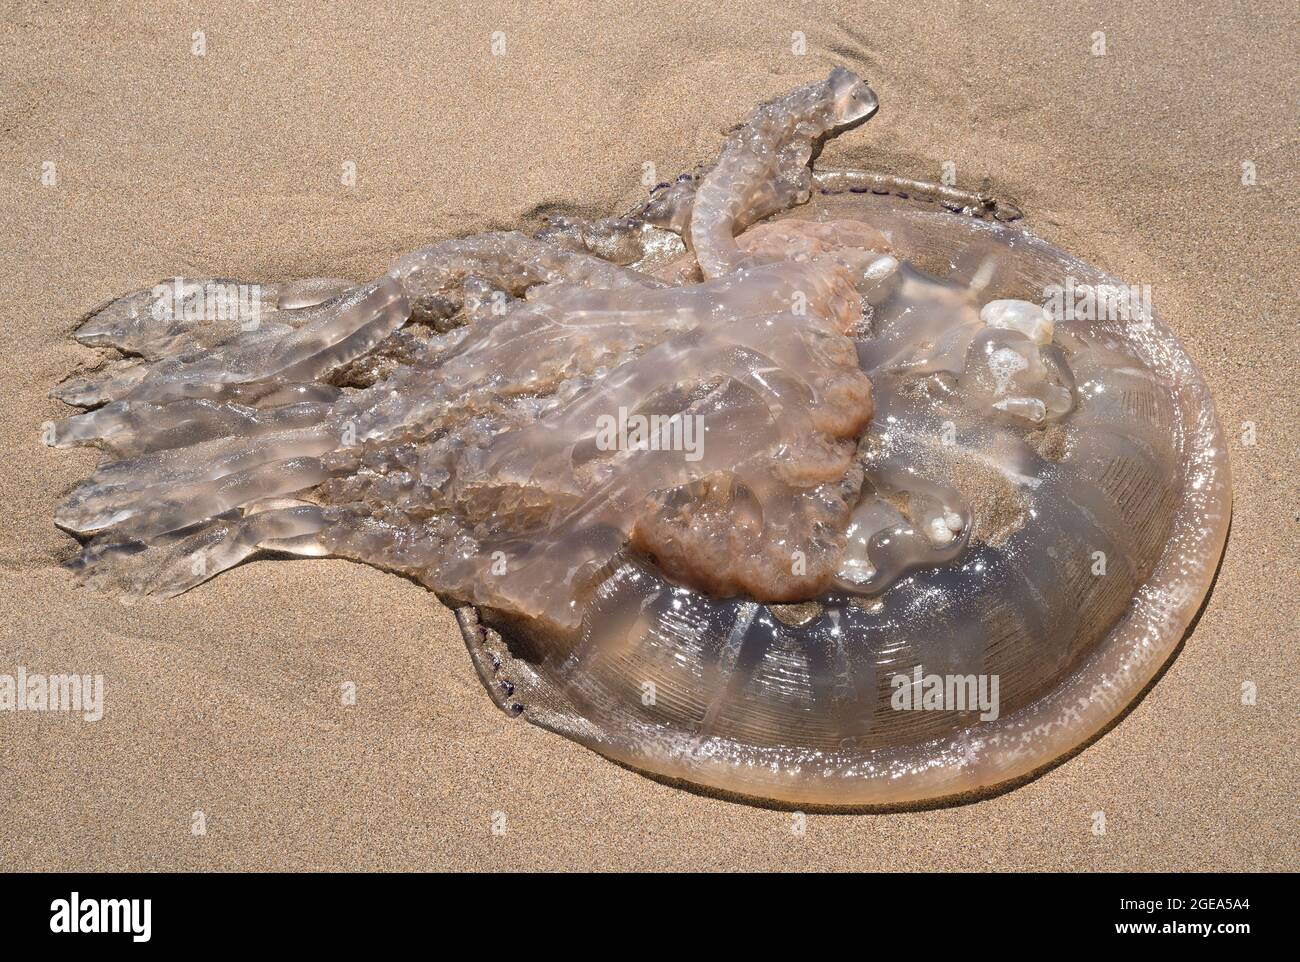 Large dead jellyfish on beach at Barafundle Bay, Pembrokeshire, Wales Stock Photo